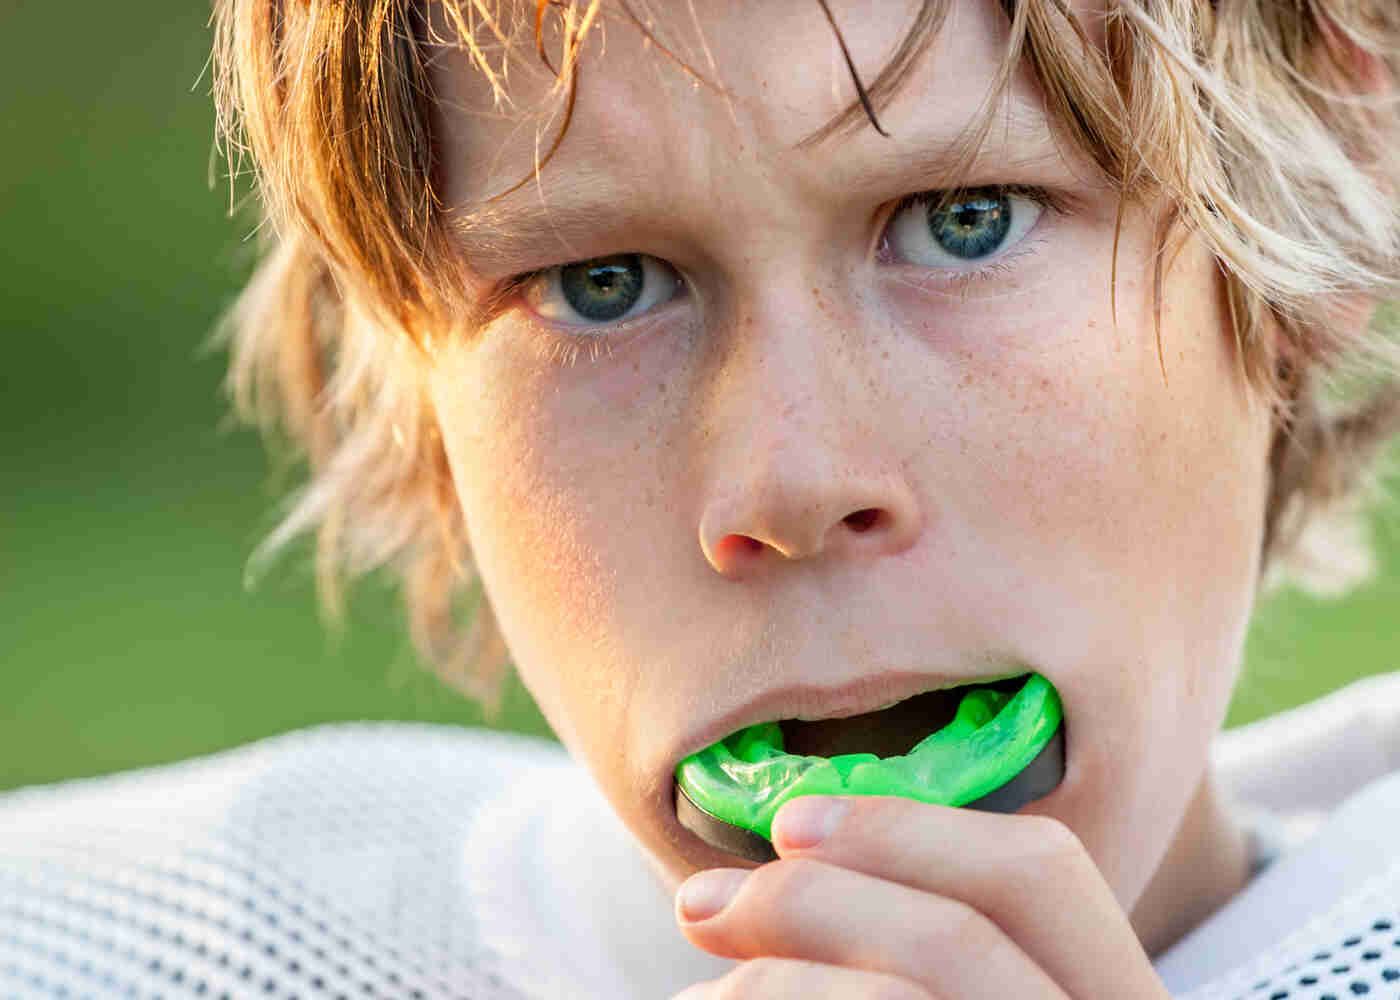 Teenage boy in football pads removes sports mouthguard